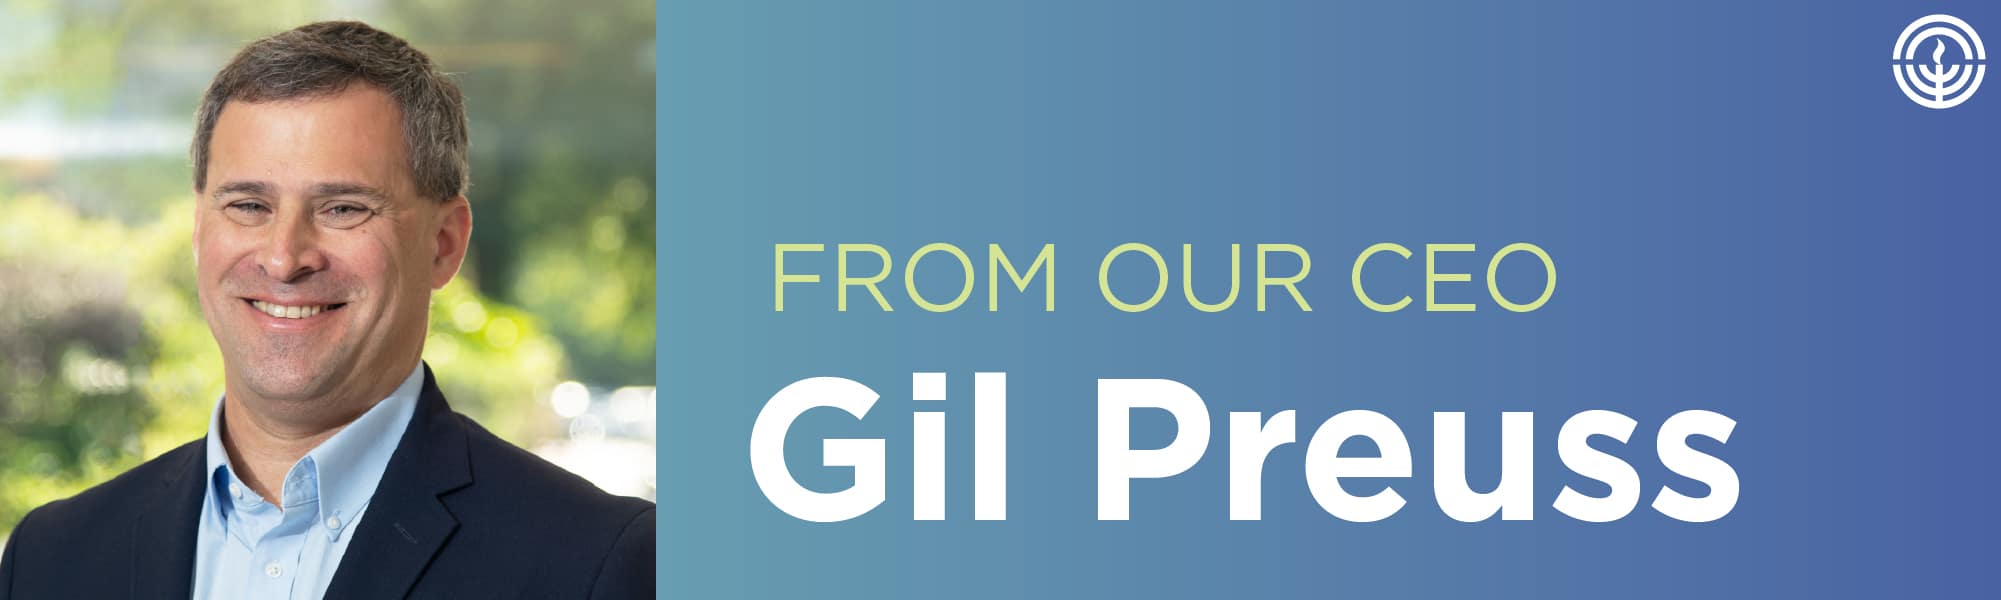 Weekly Reflection – October 25, 2019: A Message from Gil Preuss